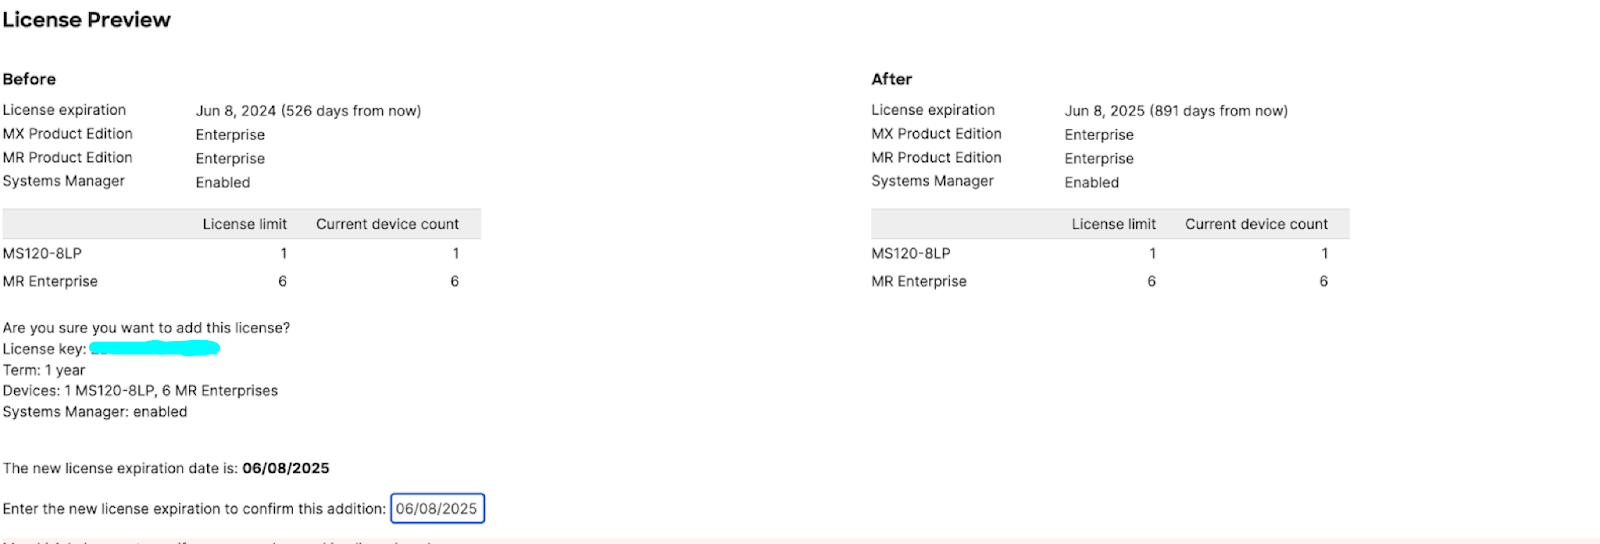 License preview displaying before and after license status, when adding a new license.